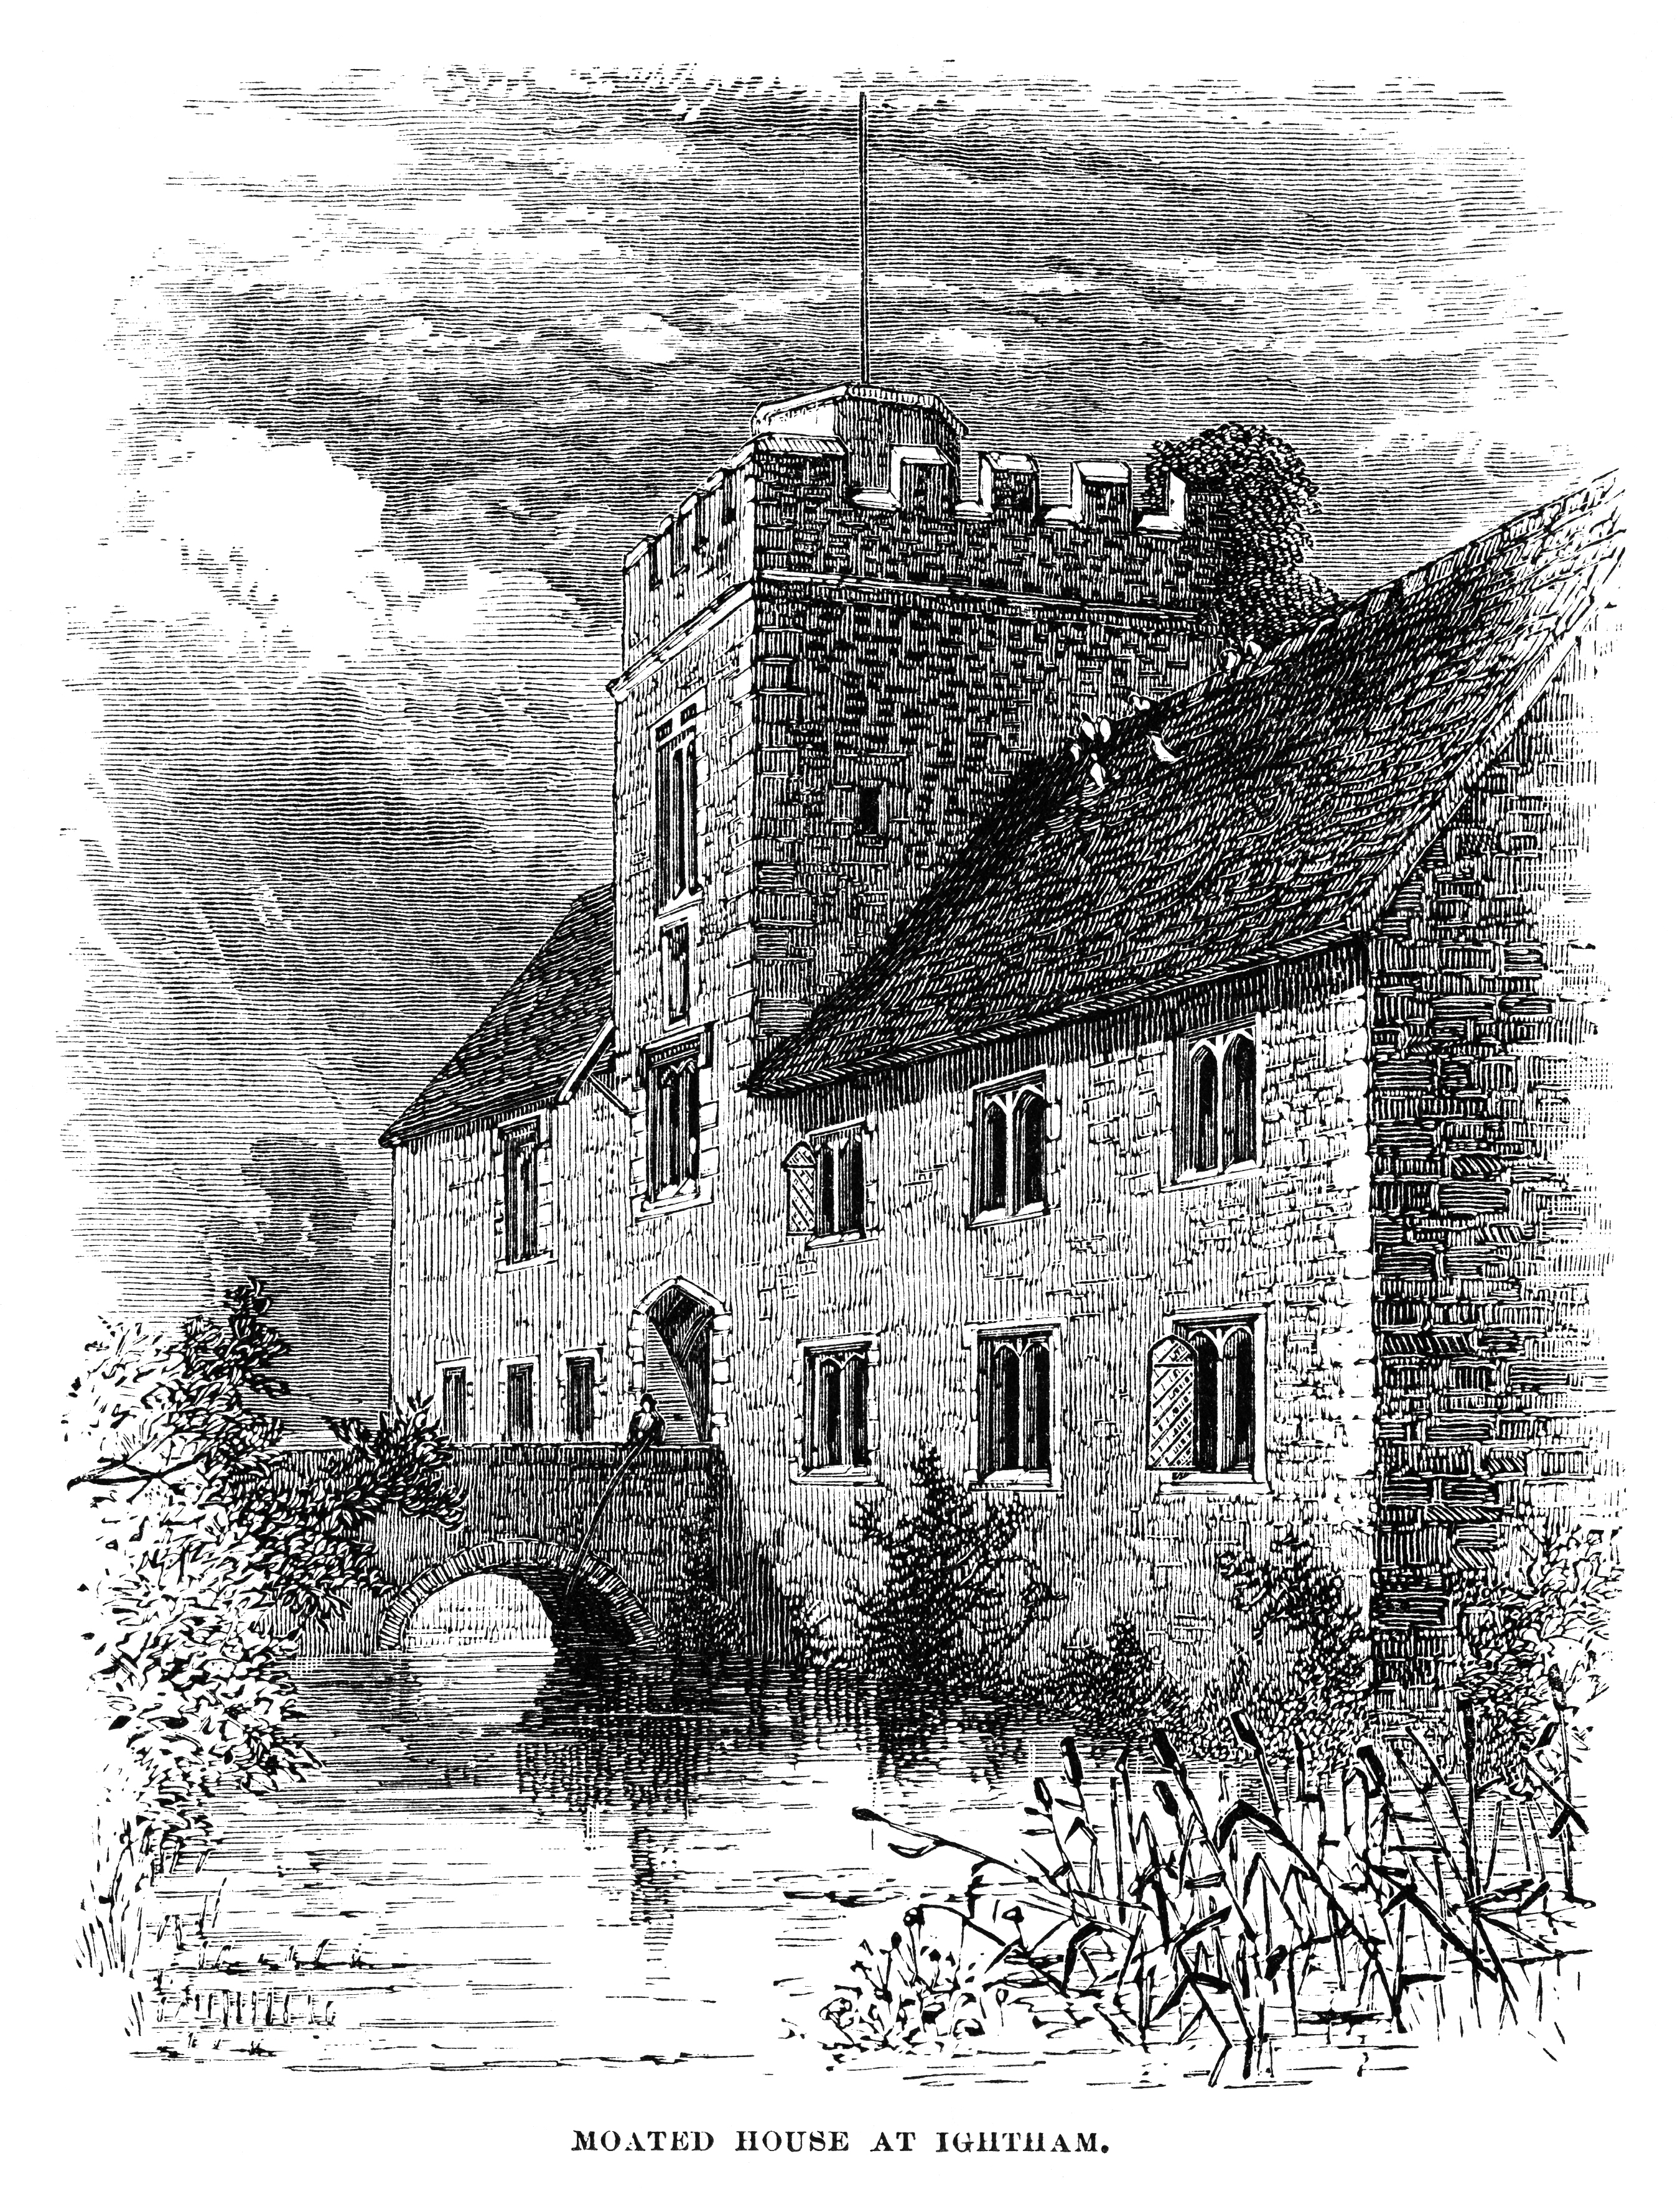 Ightham Mote pictured in an engraving from Harper’s Magazine, August 1878. (Harper's Magazine—Getty Images)